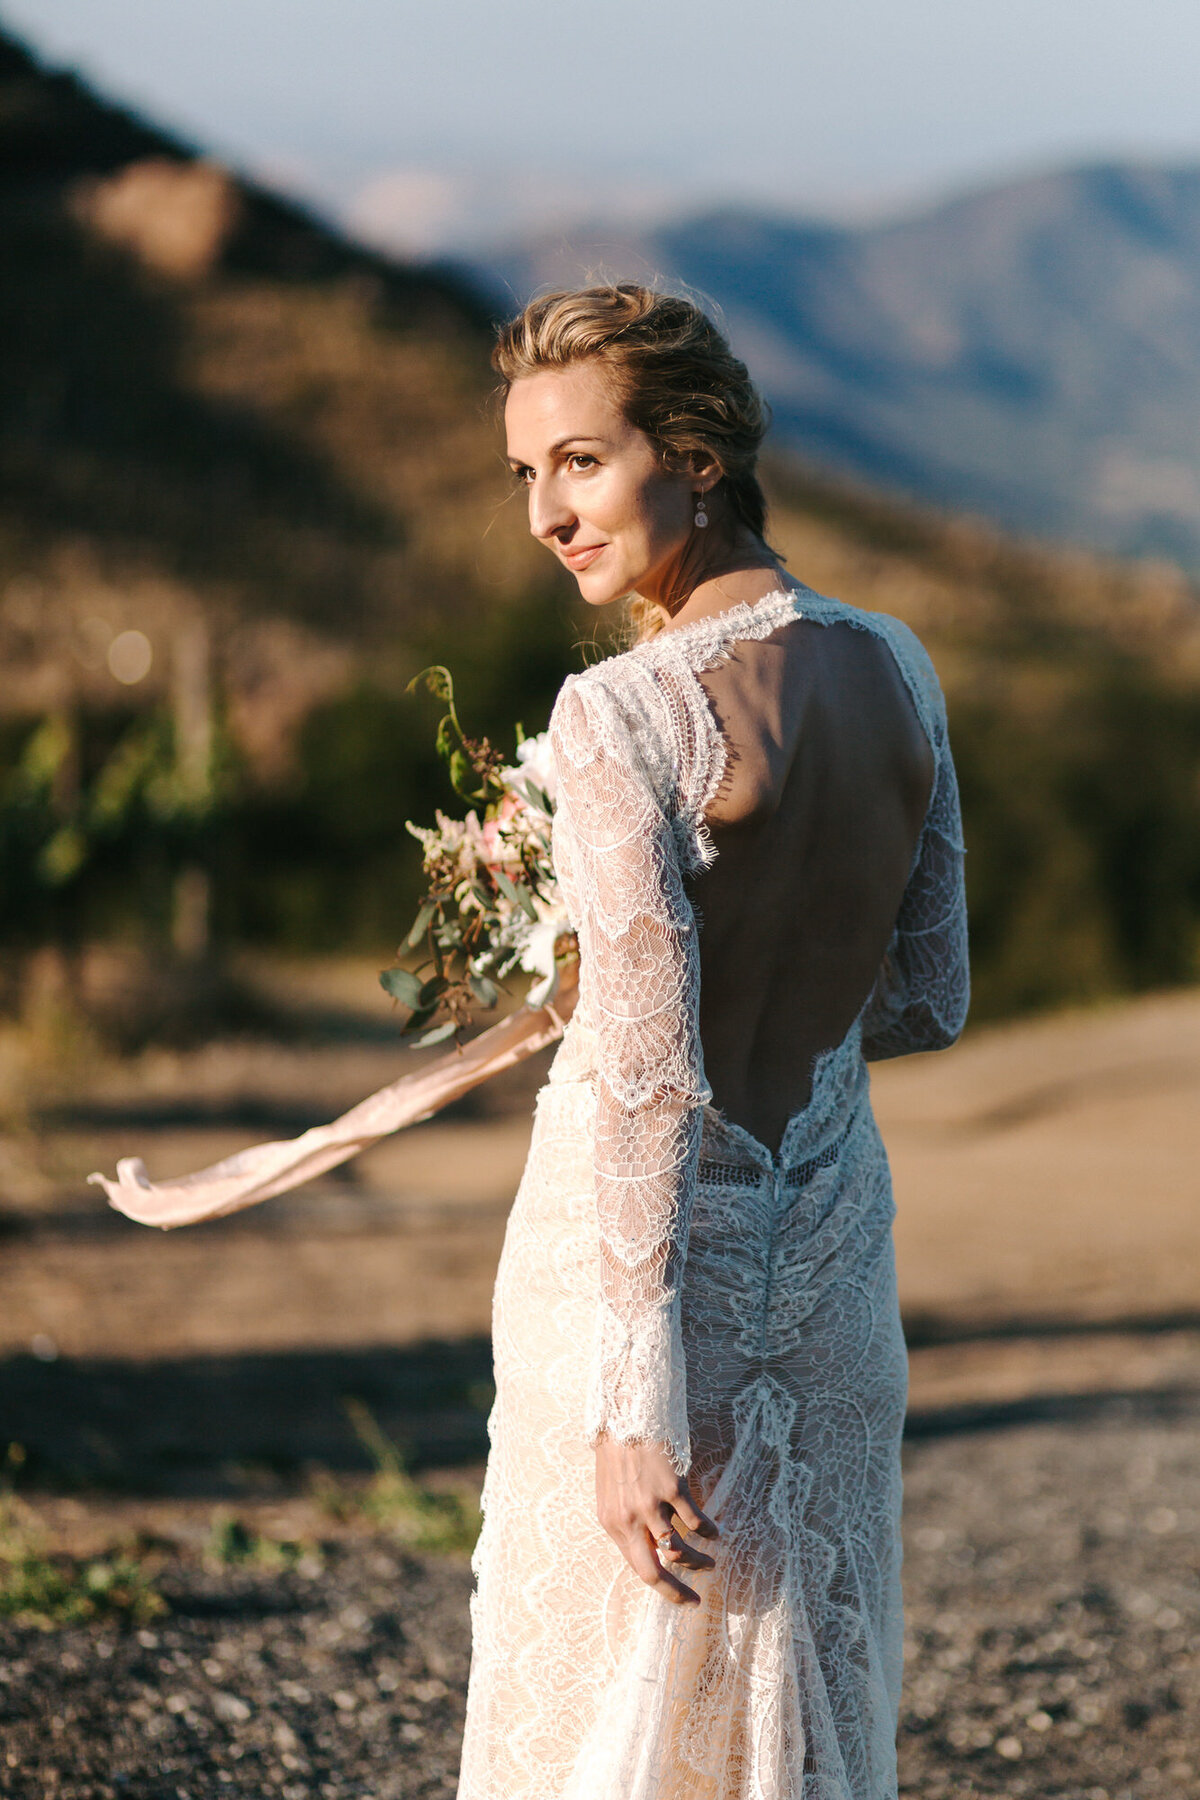 A colorful portrait of Claressinka on her wedding day at Saddlerock Ranch in Malibu, California. Claressinka has a lace dress on with long sleeves and an open back. Her body is facing the Malibu hills behind her, but she is turning her head to the left of the camera. The ribbon from her floral bouquet is blowing in the wind. Wedding photography by Stacie McChesney/Vitae Weddings.